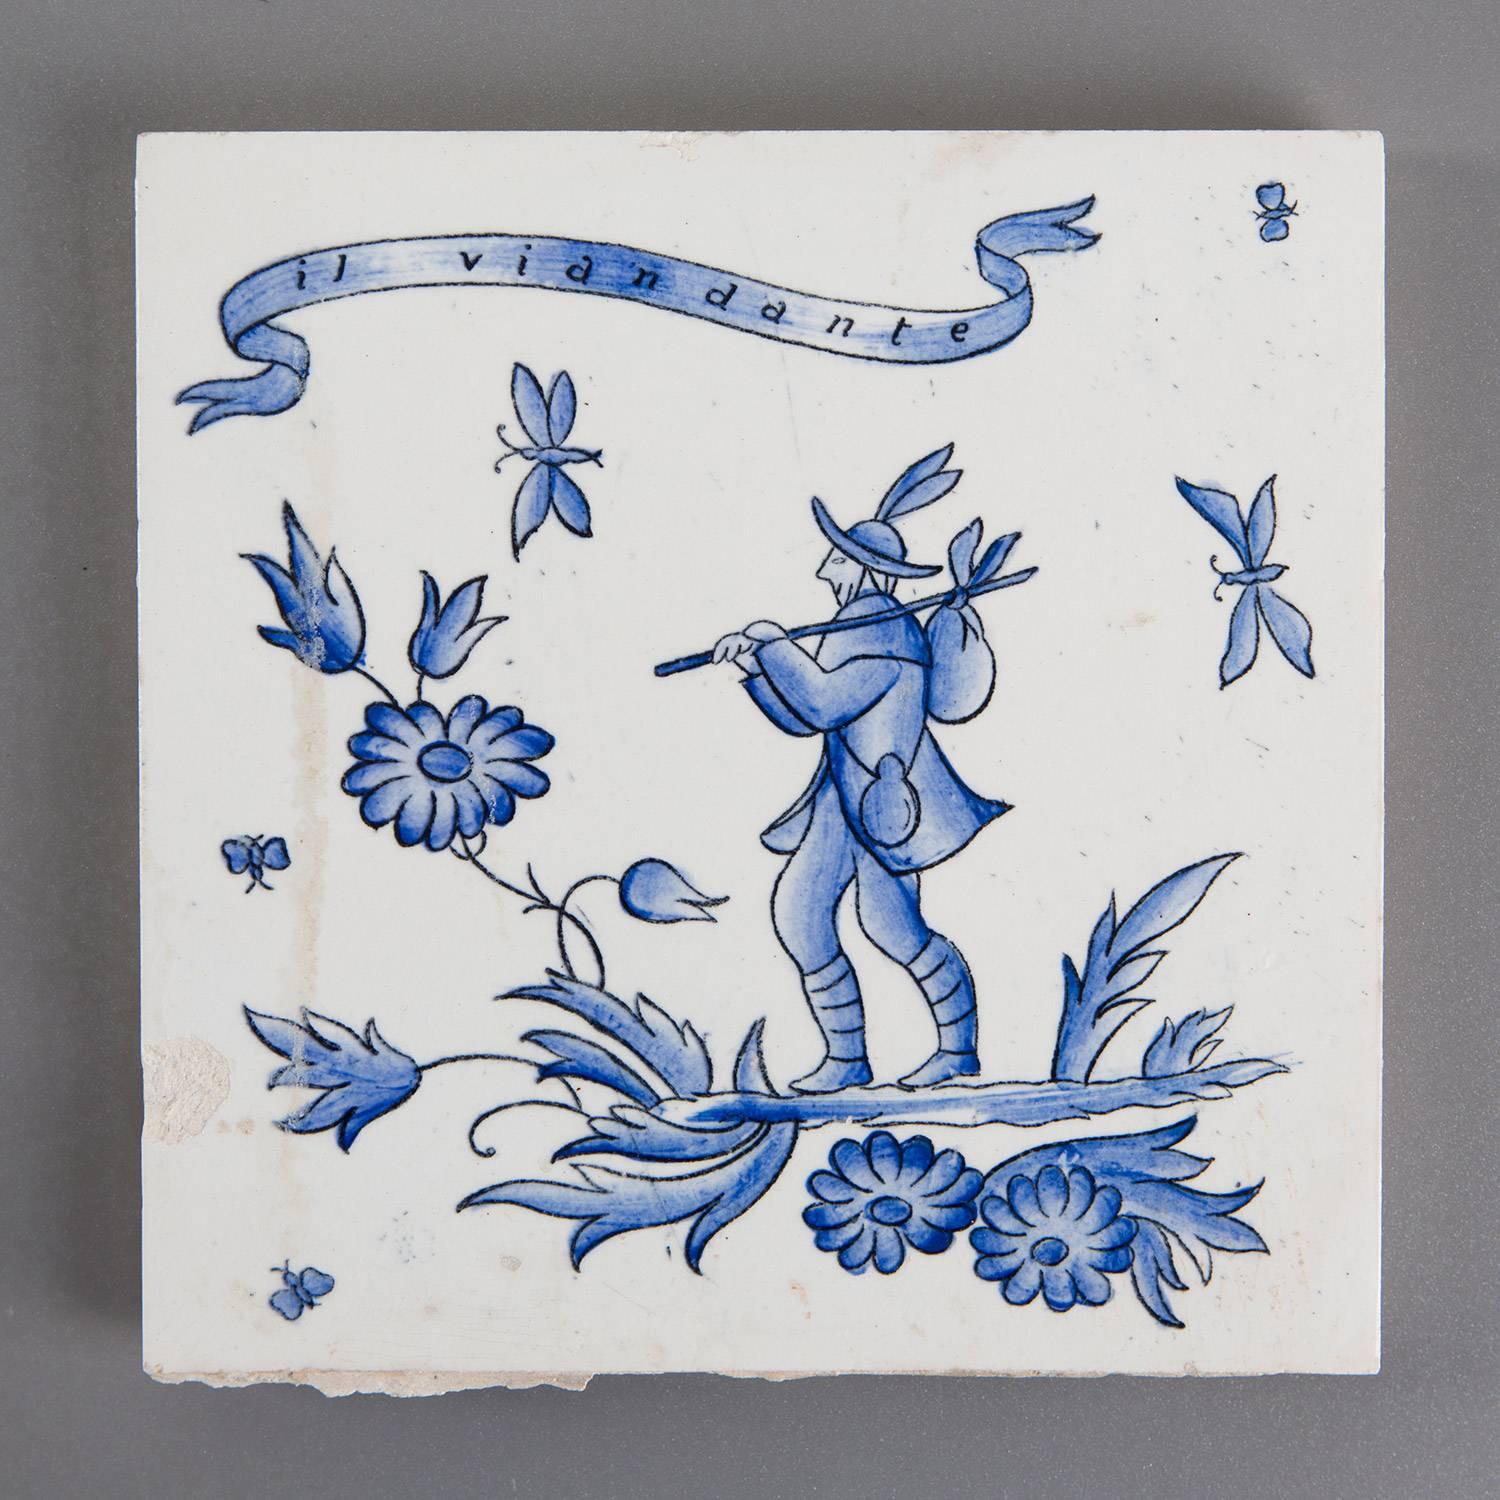 Italian Set of Six Ceramic Tiles by Gio Ponti, Italy, 1930s For Sale